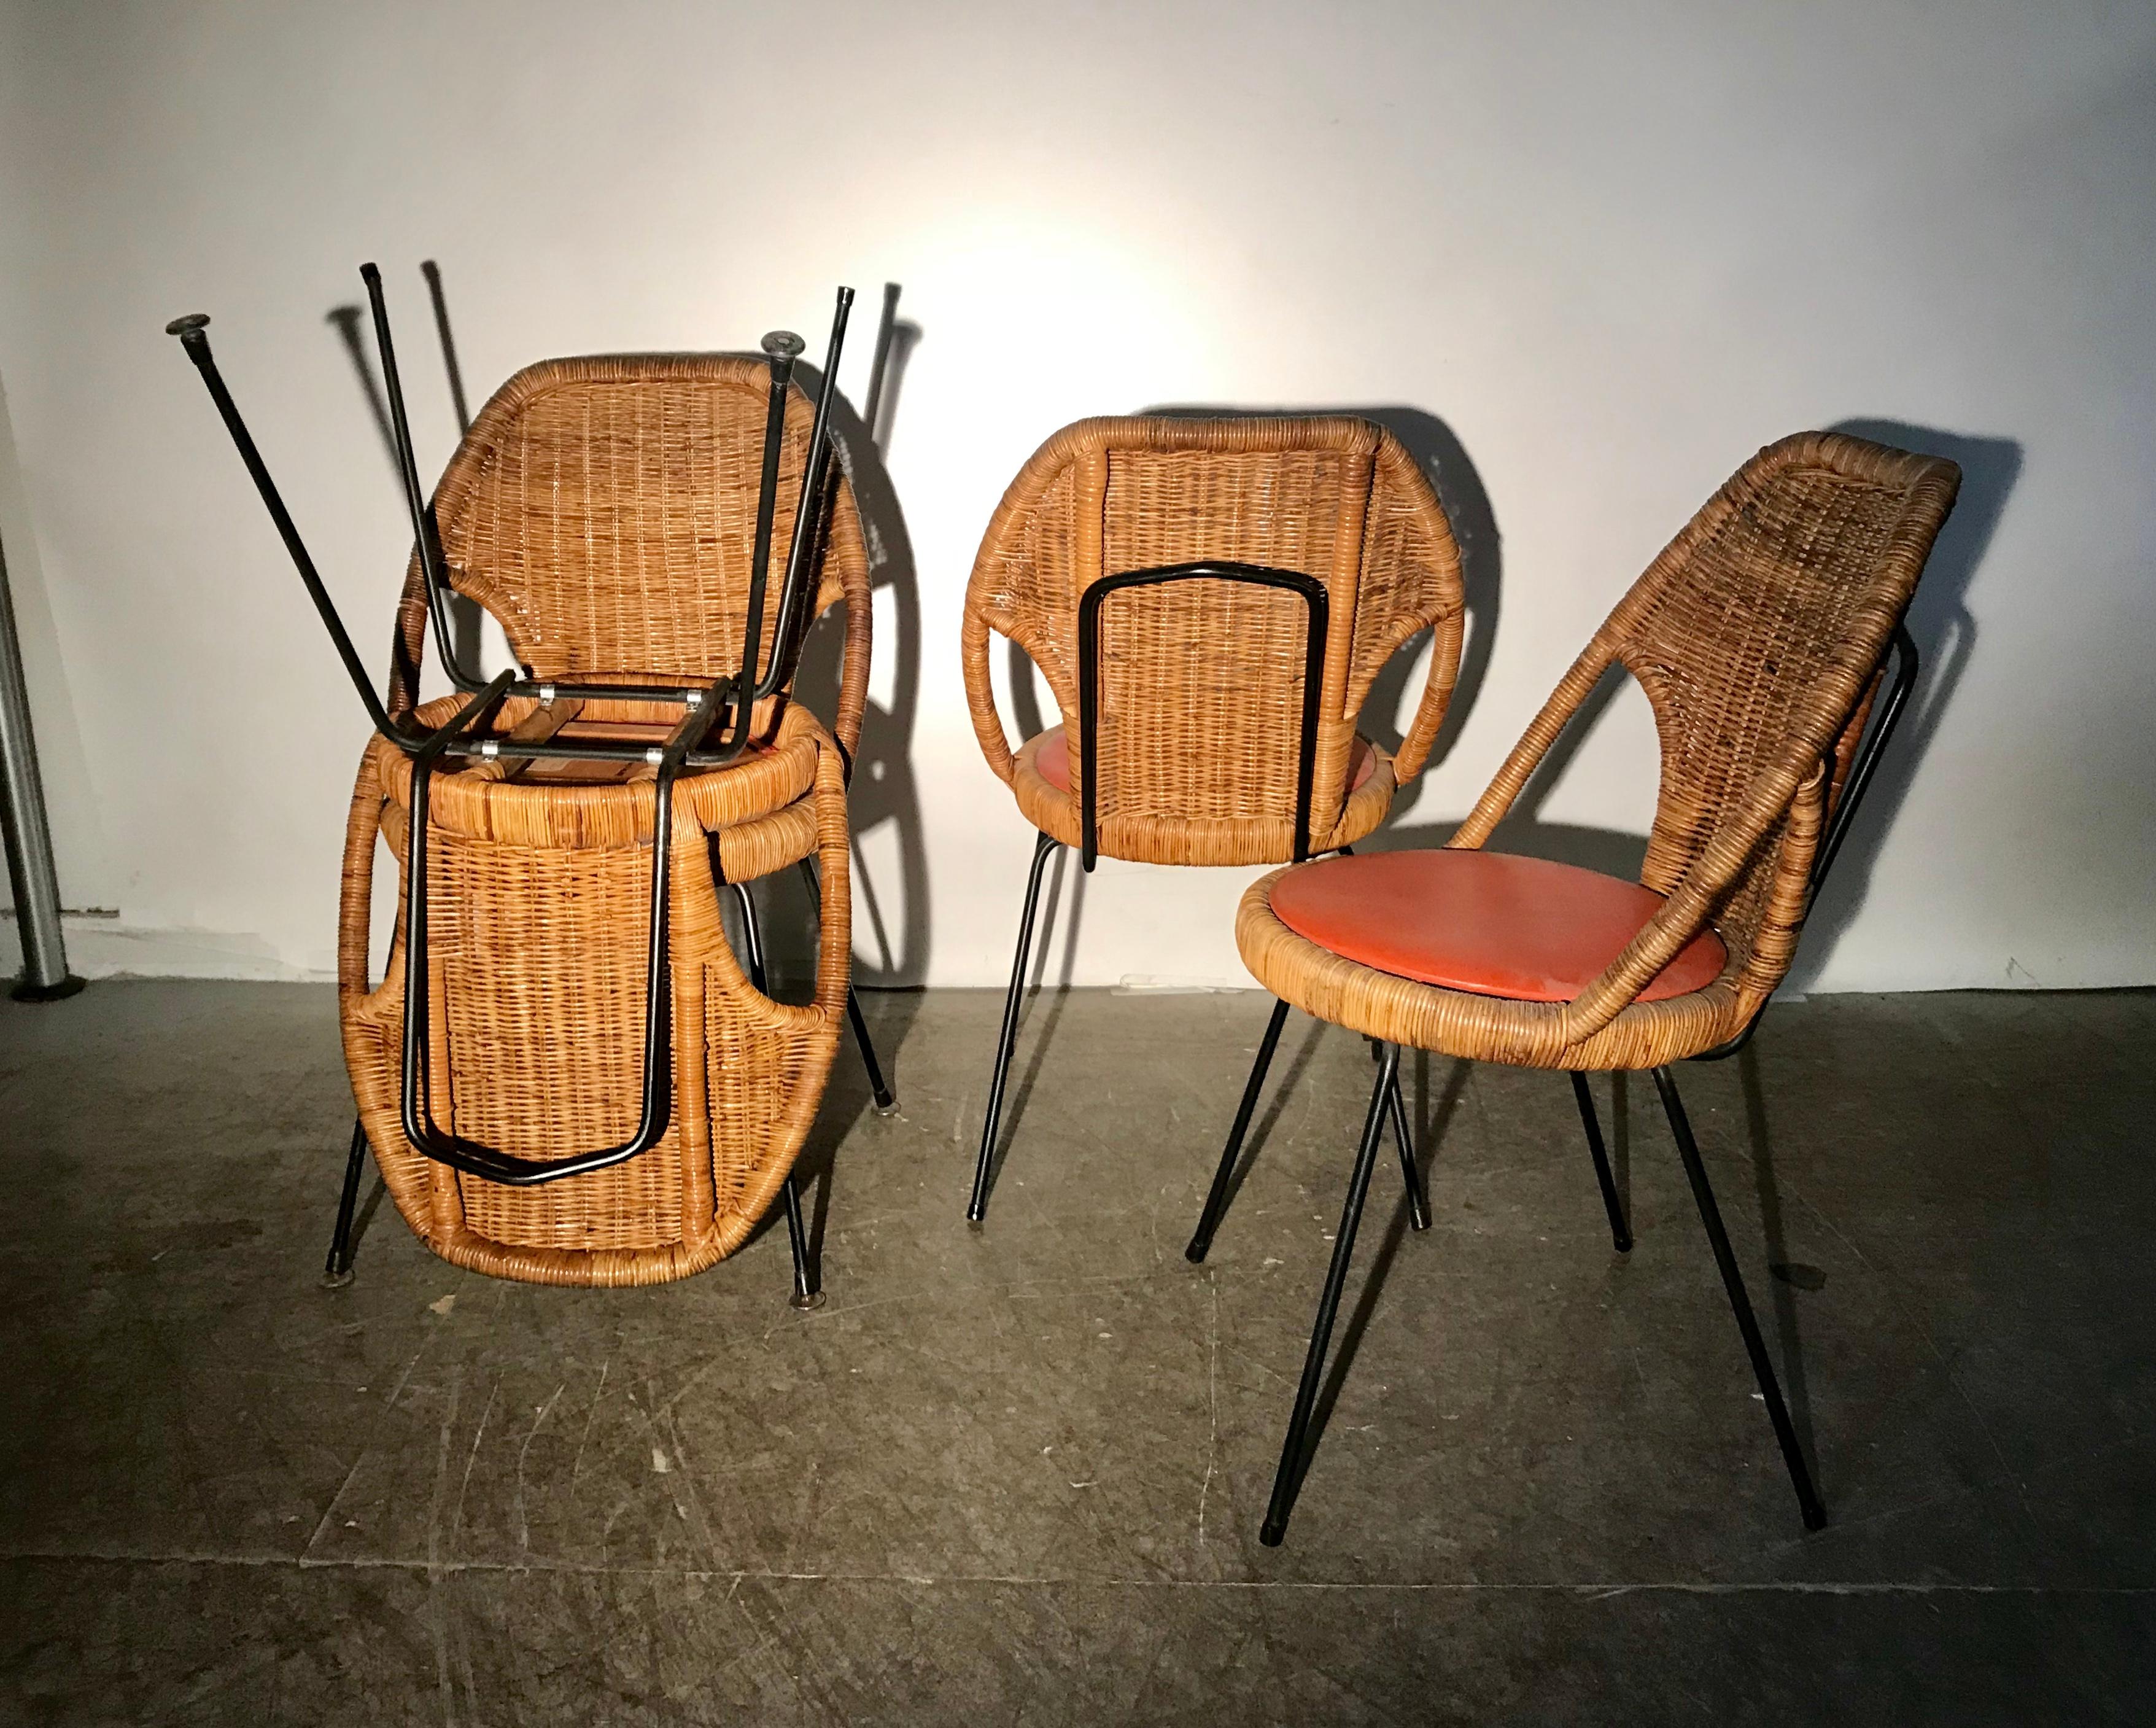 Naugahyde Danny Ho Fong, Wicker and Iron Dinette Chairs for Tropical